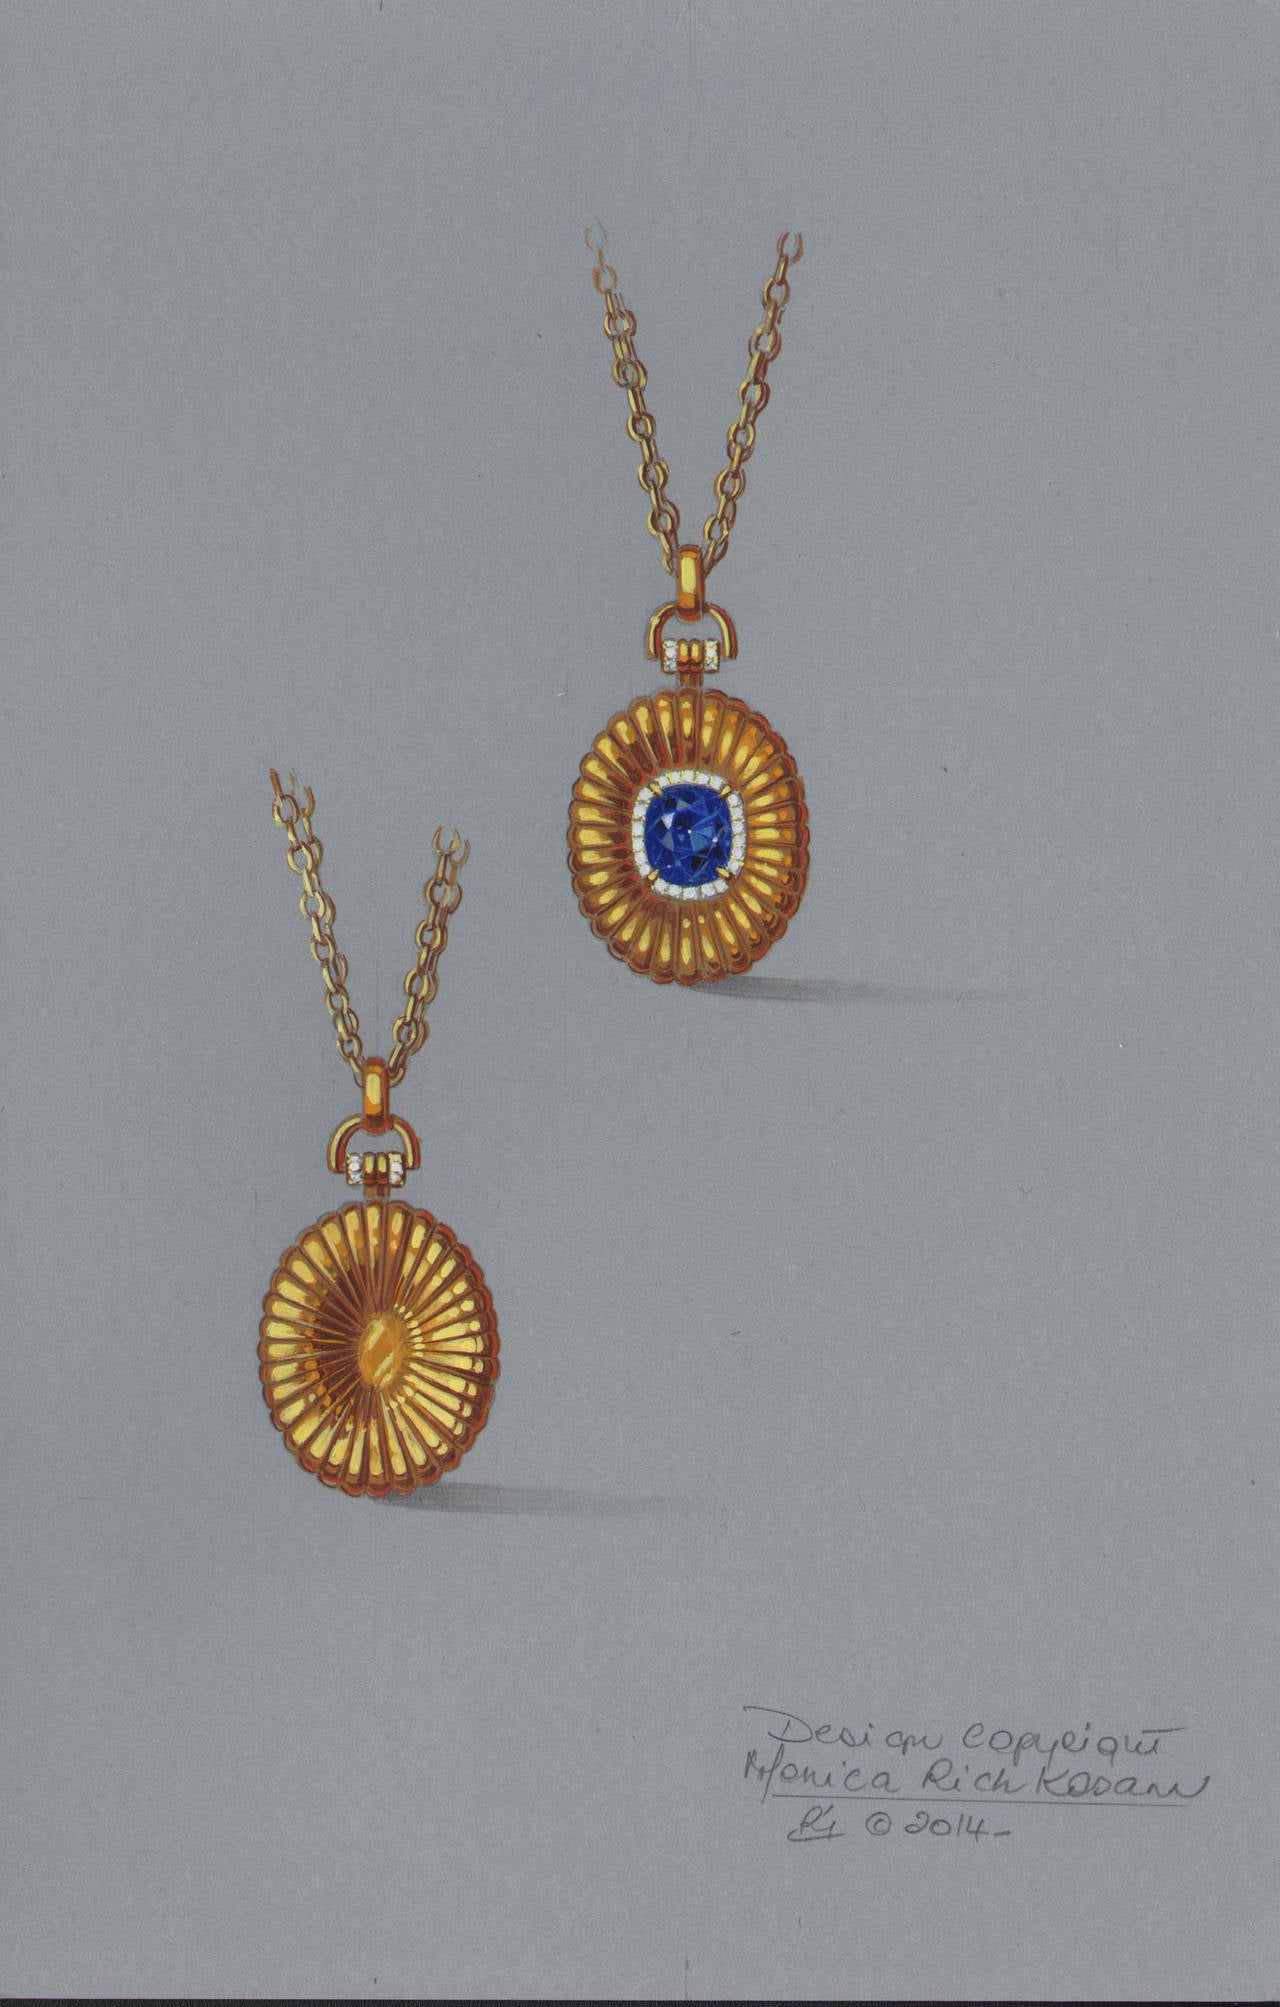 An 18K Yellow Gold Locket set with a cushion-cut sapphire surrounded by a diamond border on a 32